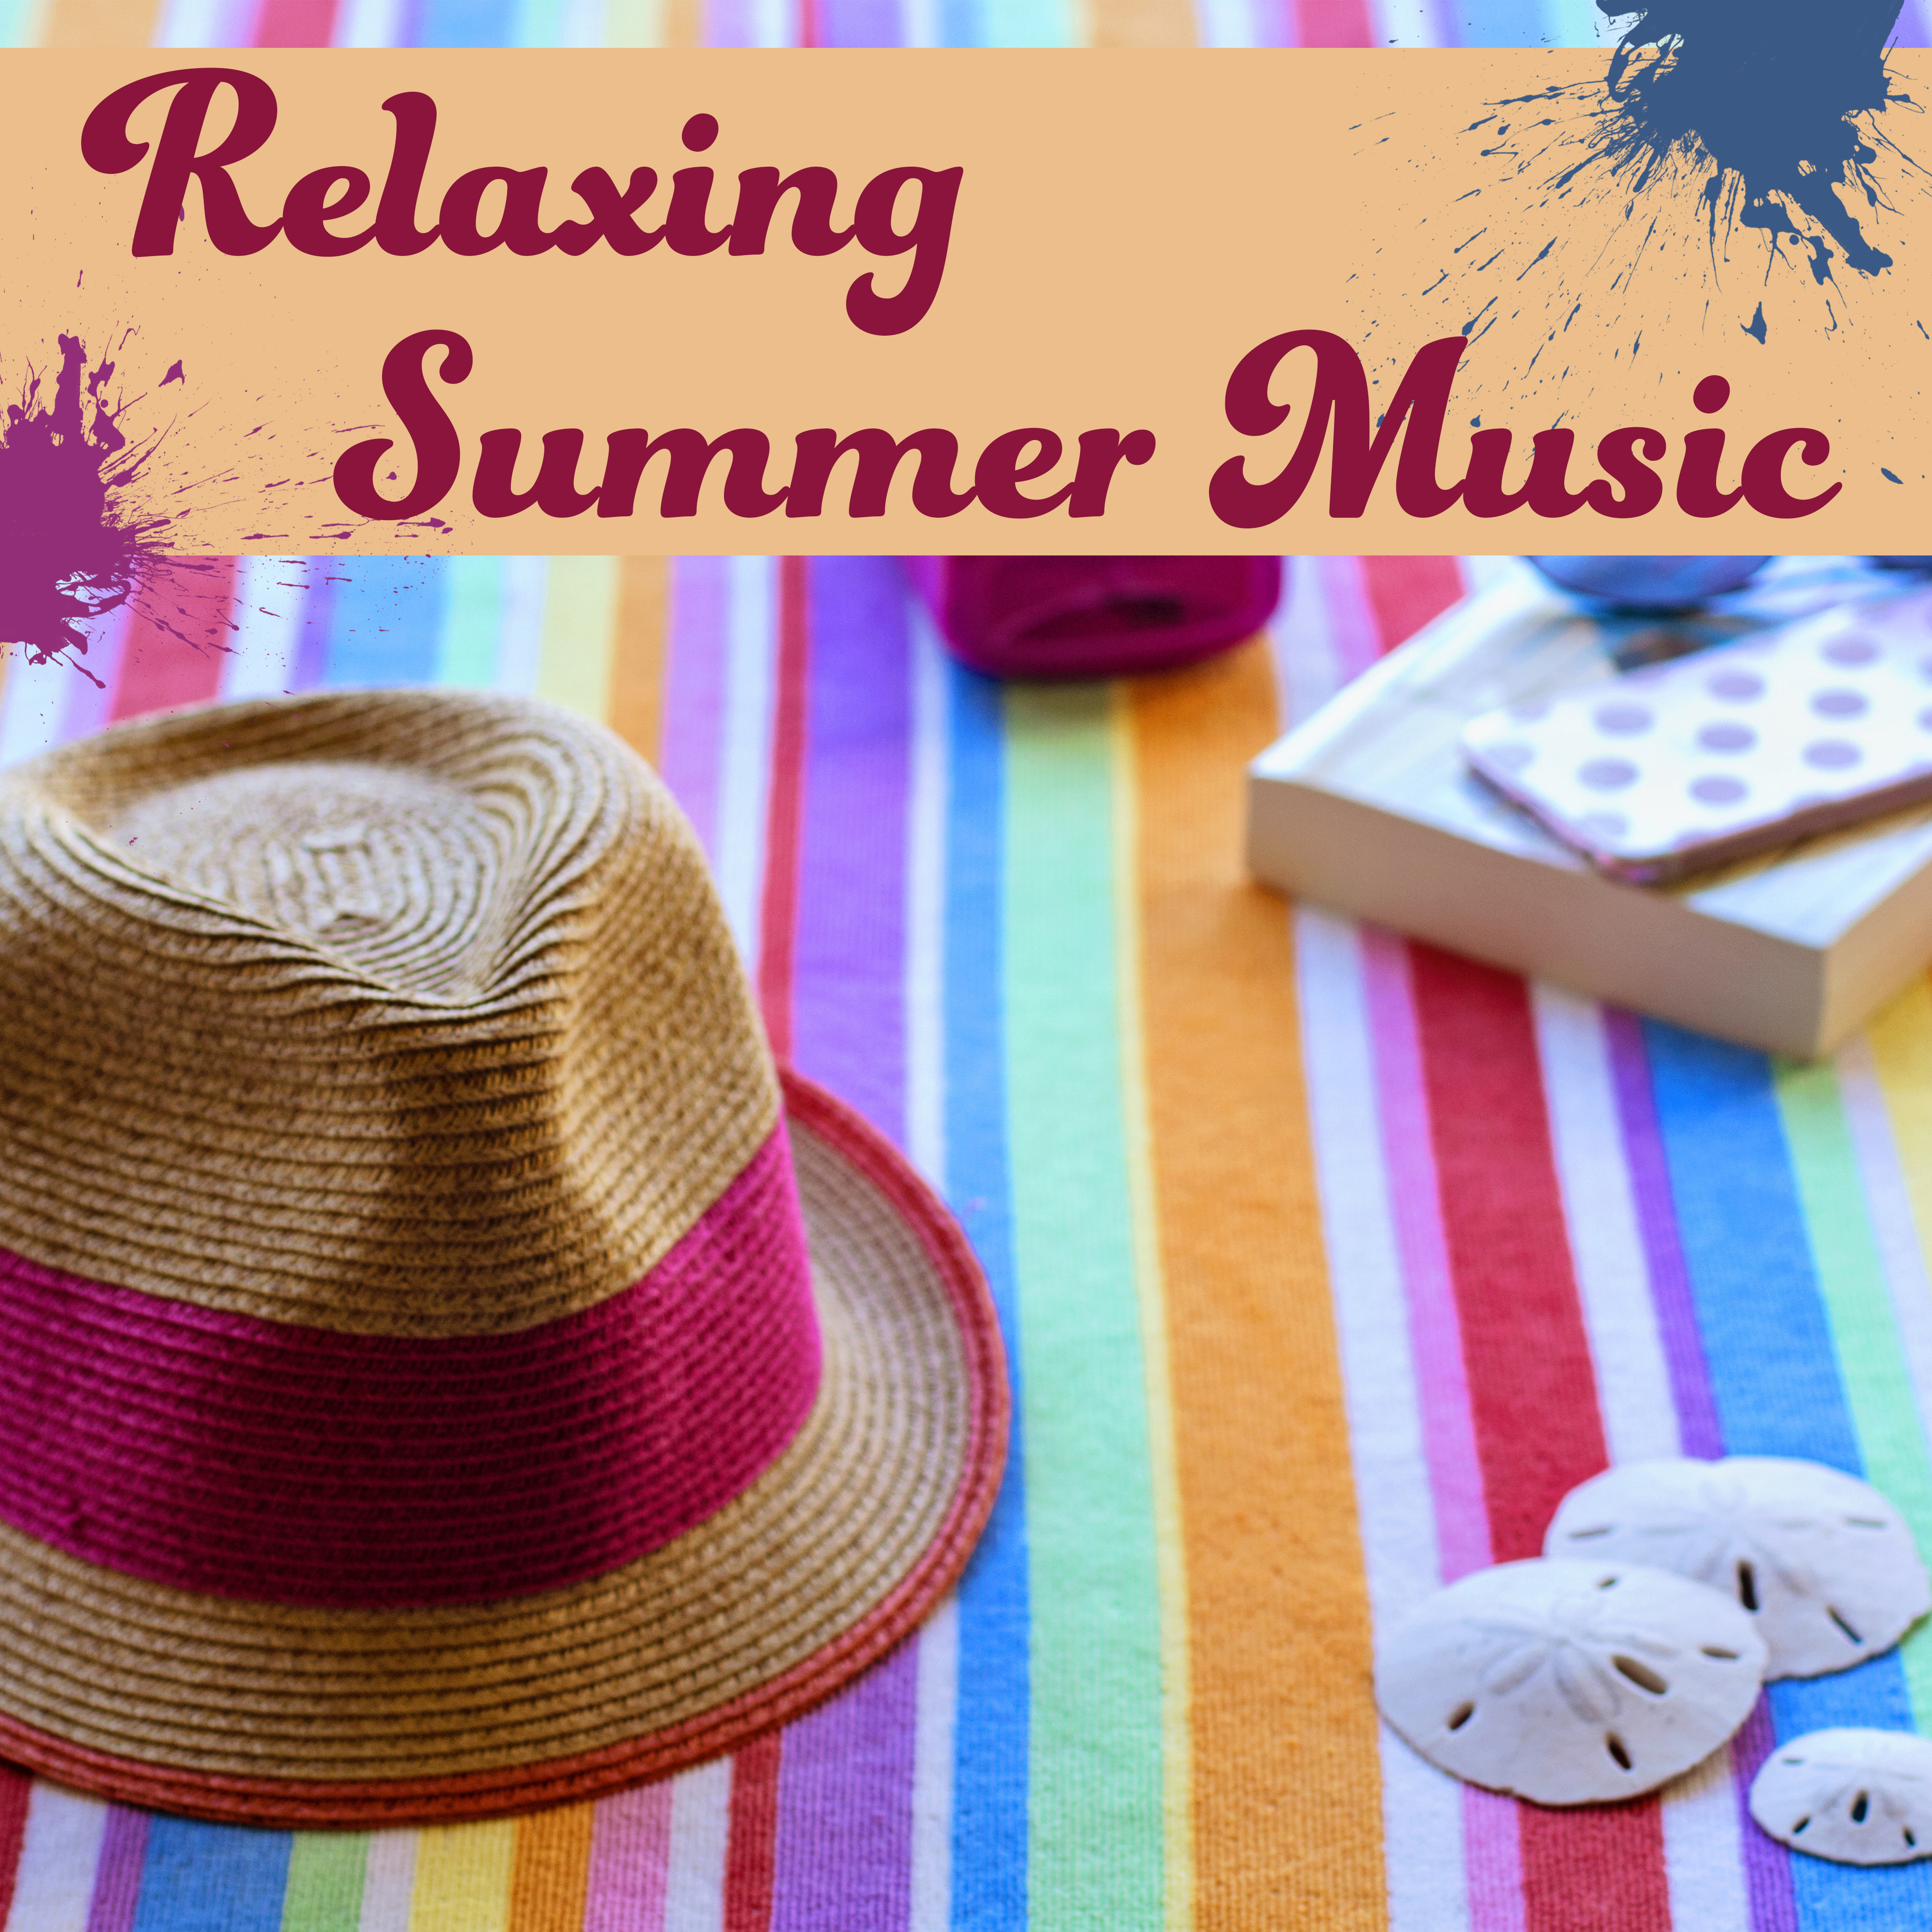 Relaxing Summer Music – Beach Relaxation, Holiday Breeze, Soft Sounds to Relax, Chill Out Lounge